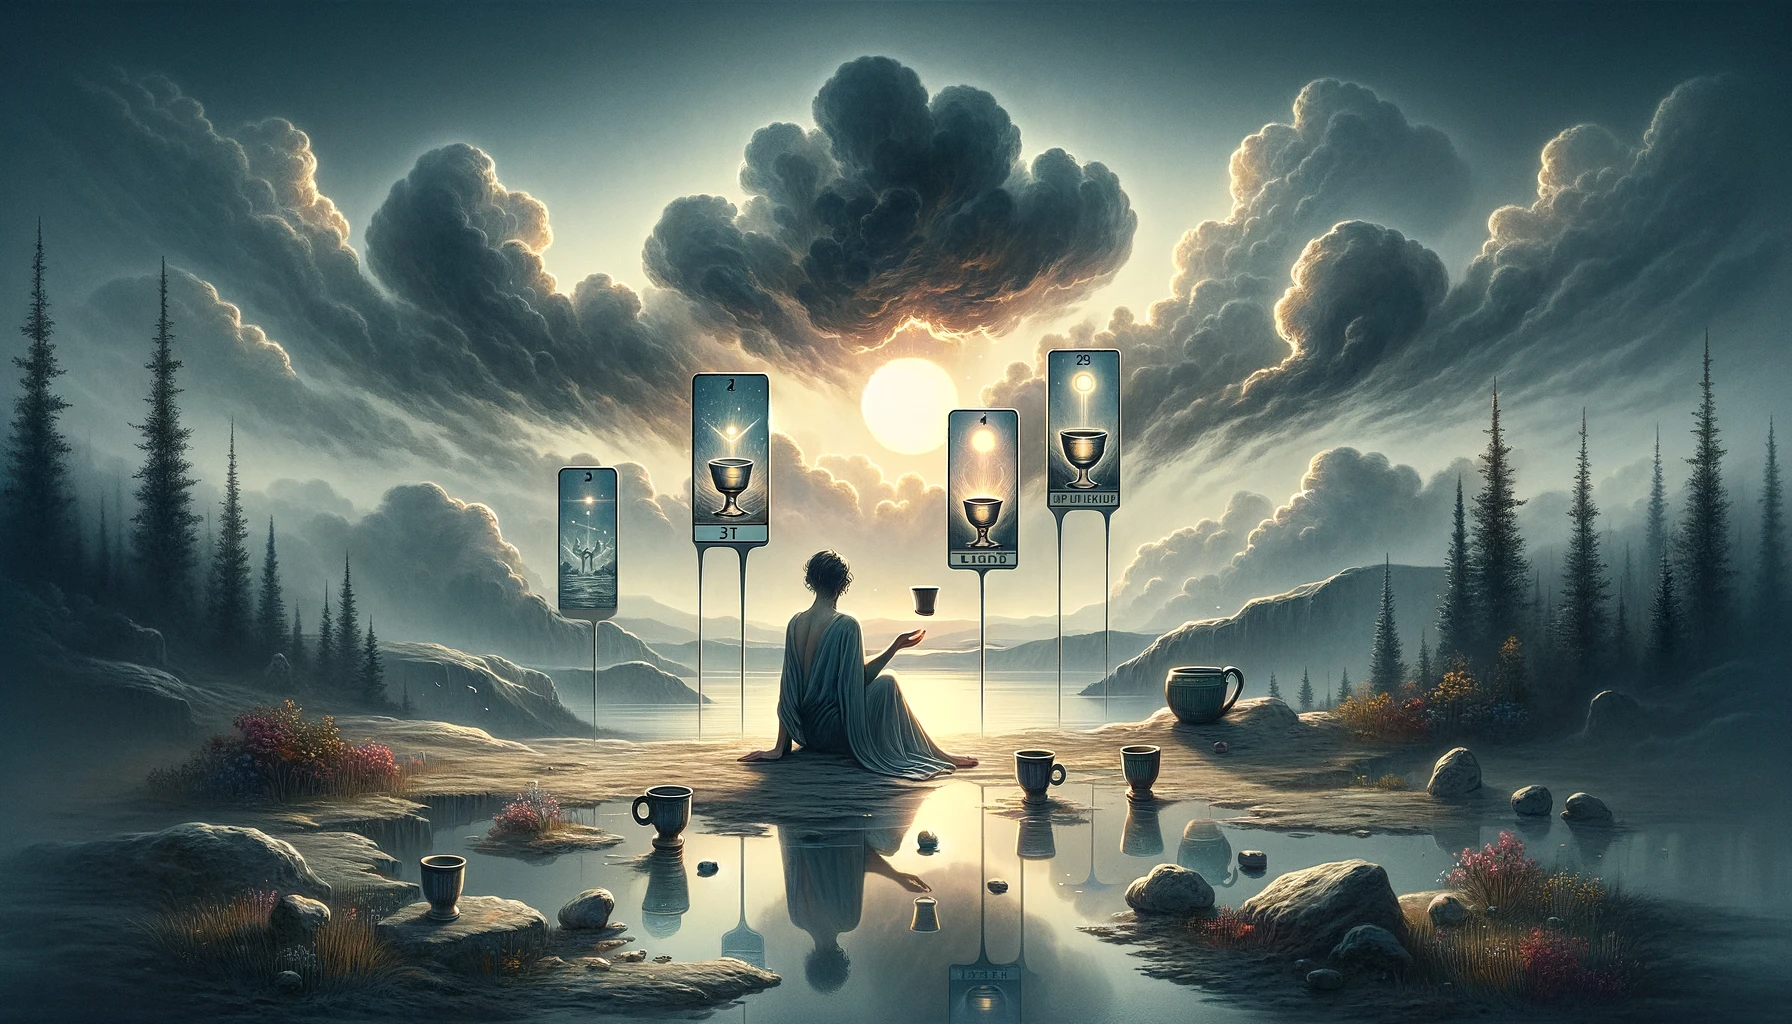 "An illustration depicting introspection and emotional exploration. A figure sits in reflection, surrounded by three cups representing current emotional states, with a fourth cup offered from a cloud symbolizing new insights. The subdued setting reflects contemplation and solitude, suggesting a journey towards understanding and potential growth."